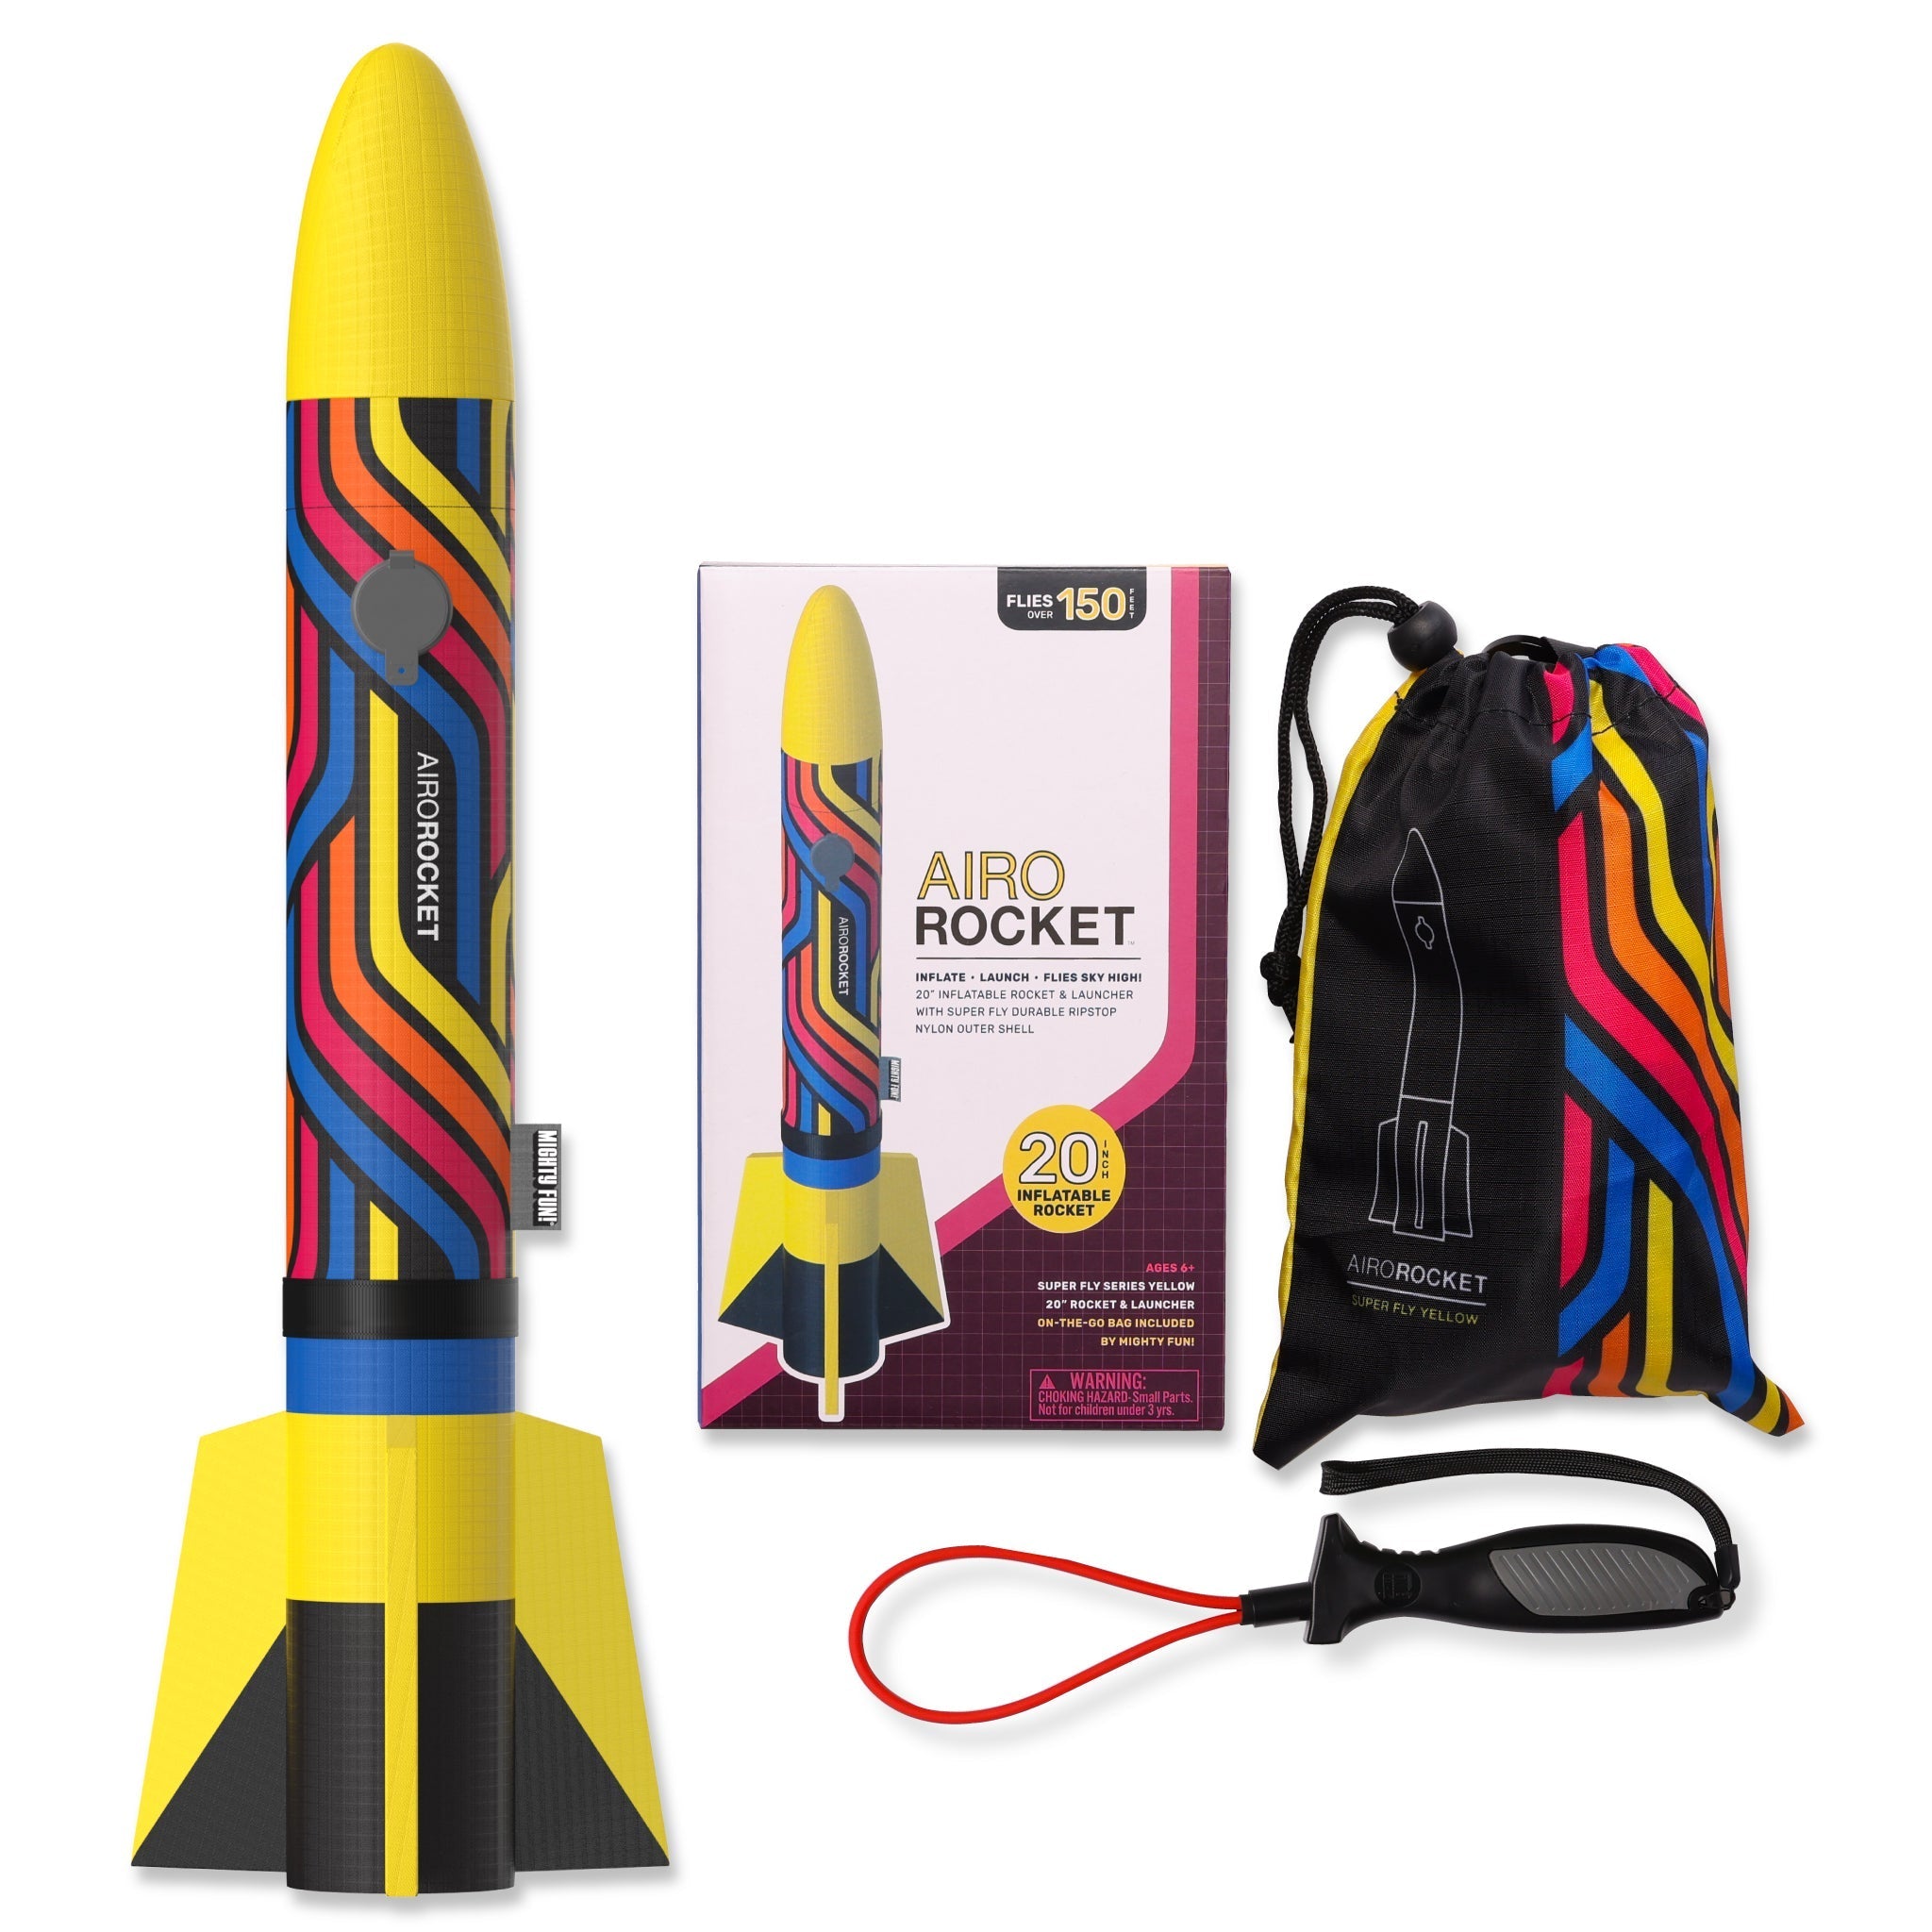 Yellow Airo Rocket toy rocket with hand launcher, storage bag, and color box by Mighty Fun!